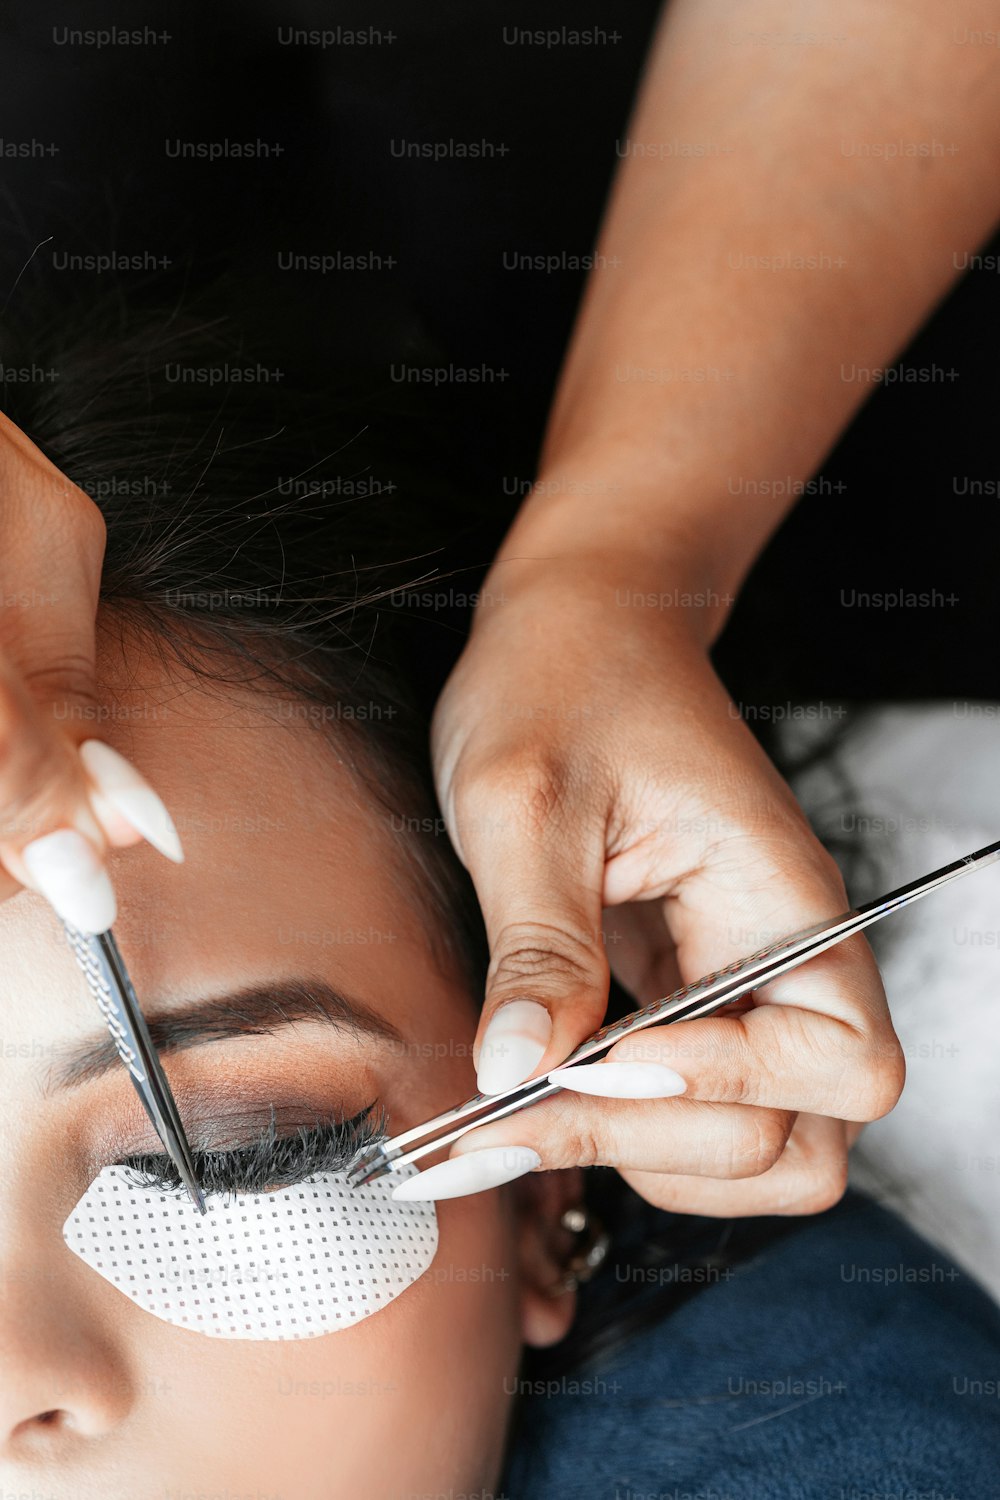 Hands holding tweezers while performing eyelash extension attachment.